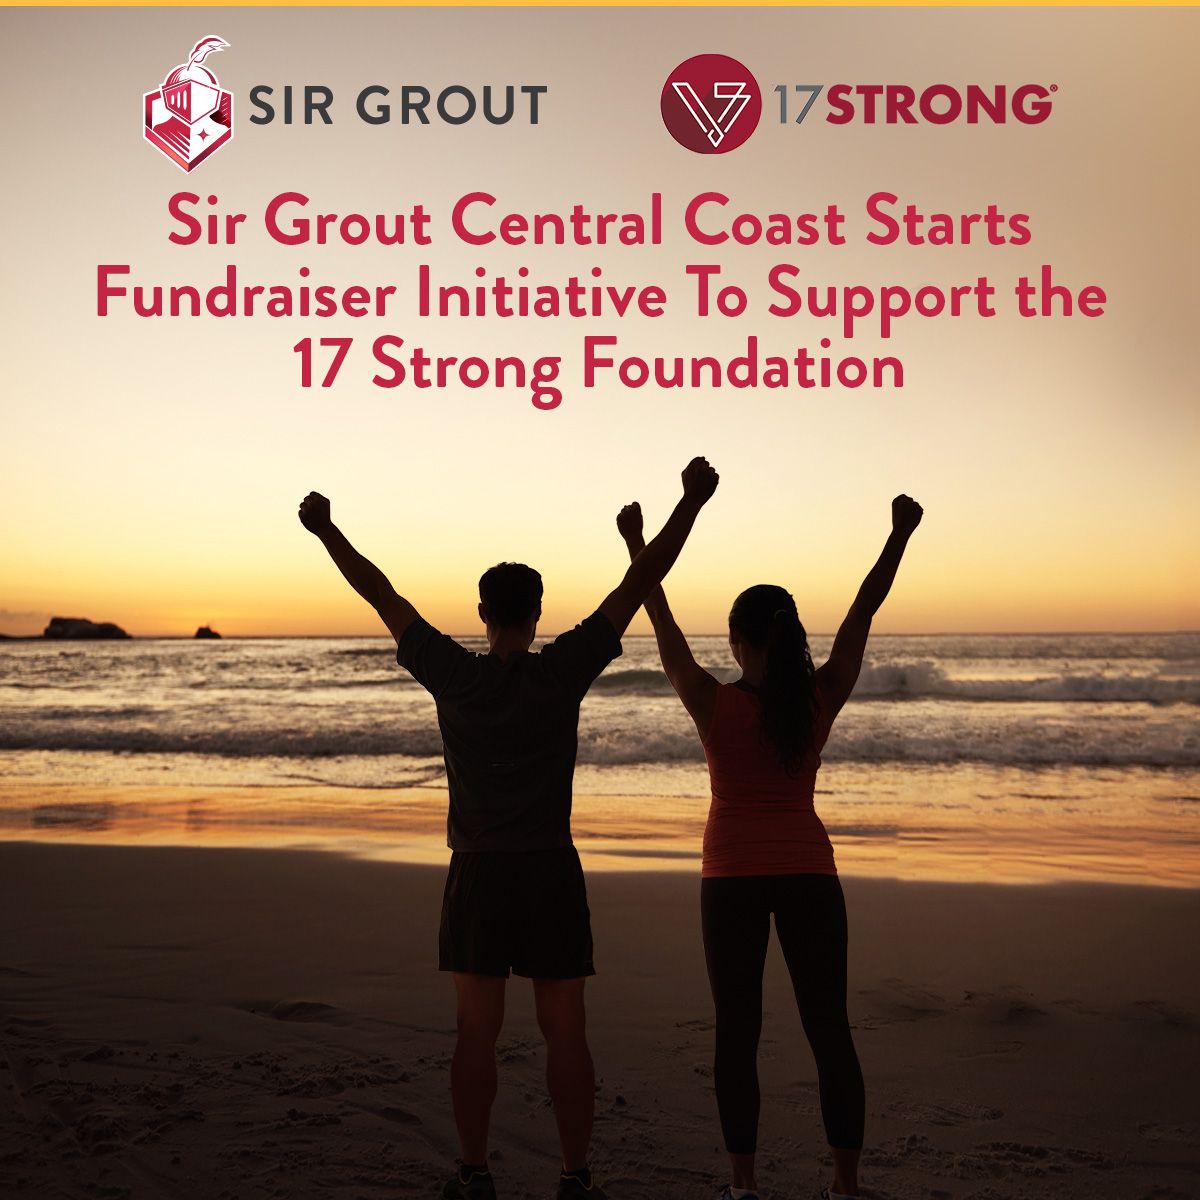 Sir Grout Central Coast Starts Fundraiser Initiative To Support The 17 Strong Foundation